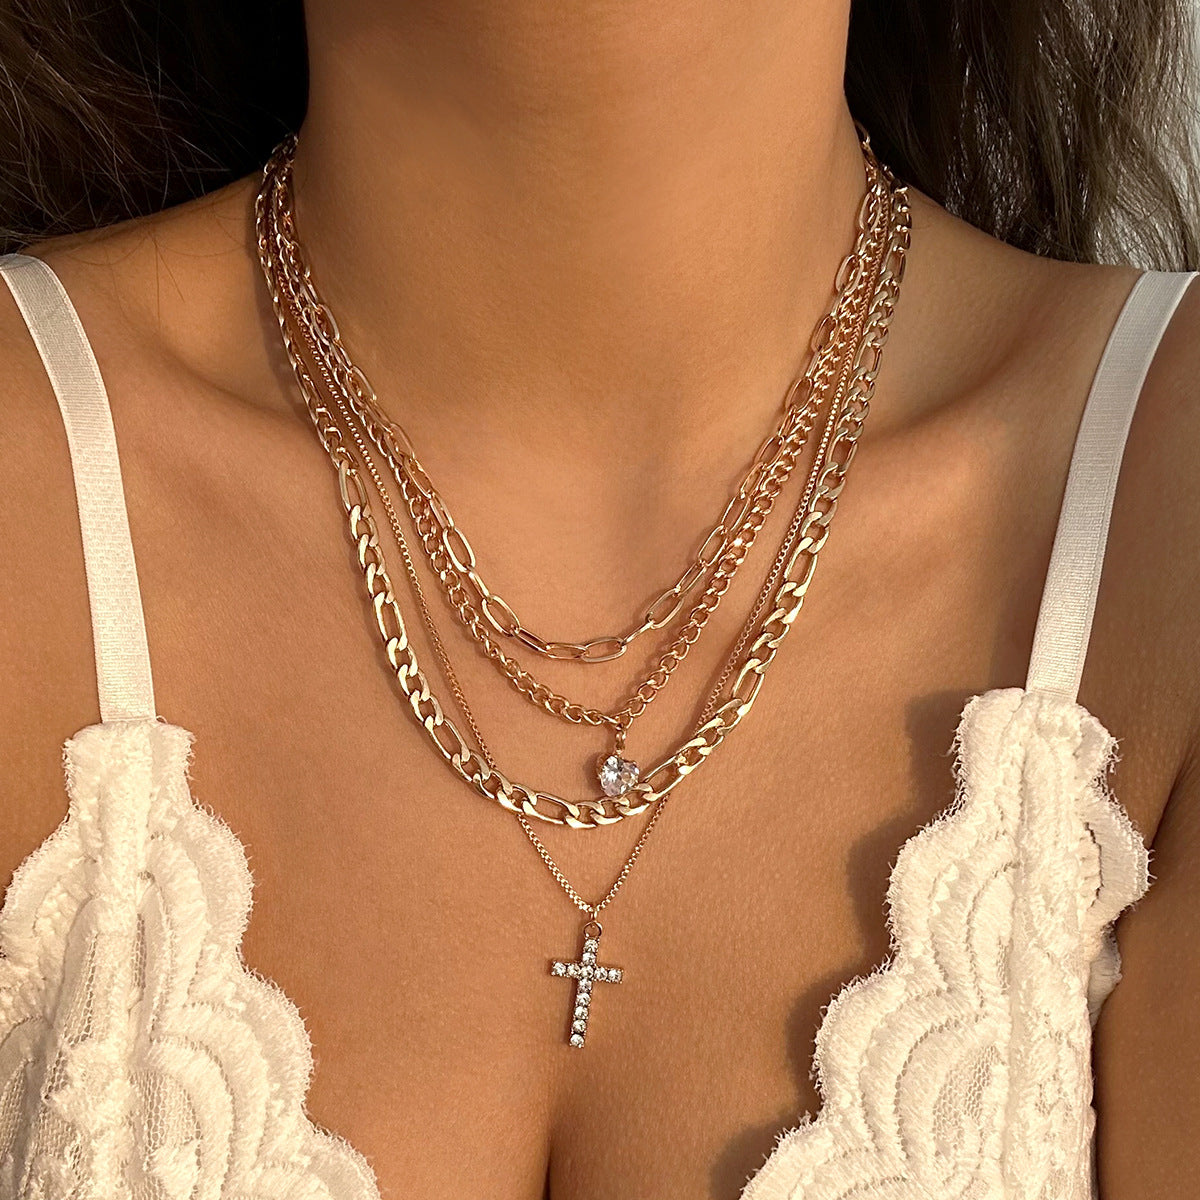 European and American Cross Jewelry Collection with Full Diamond Heart Pendant Necklace